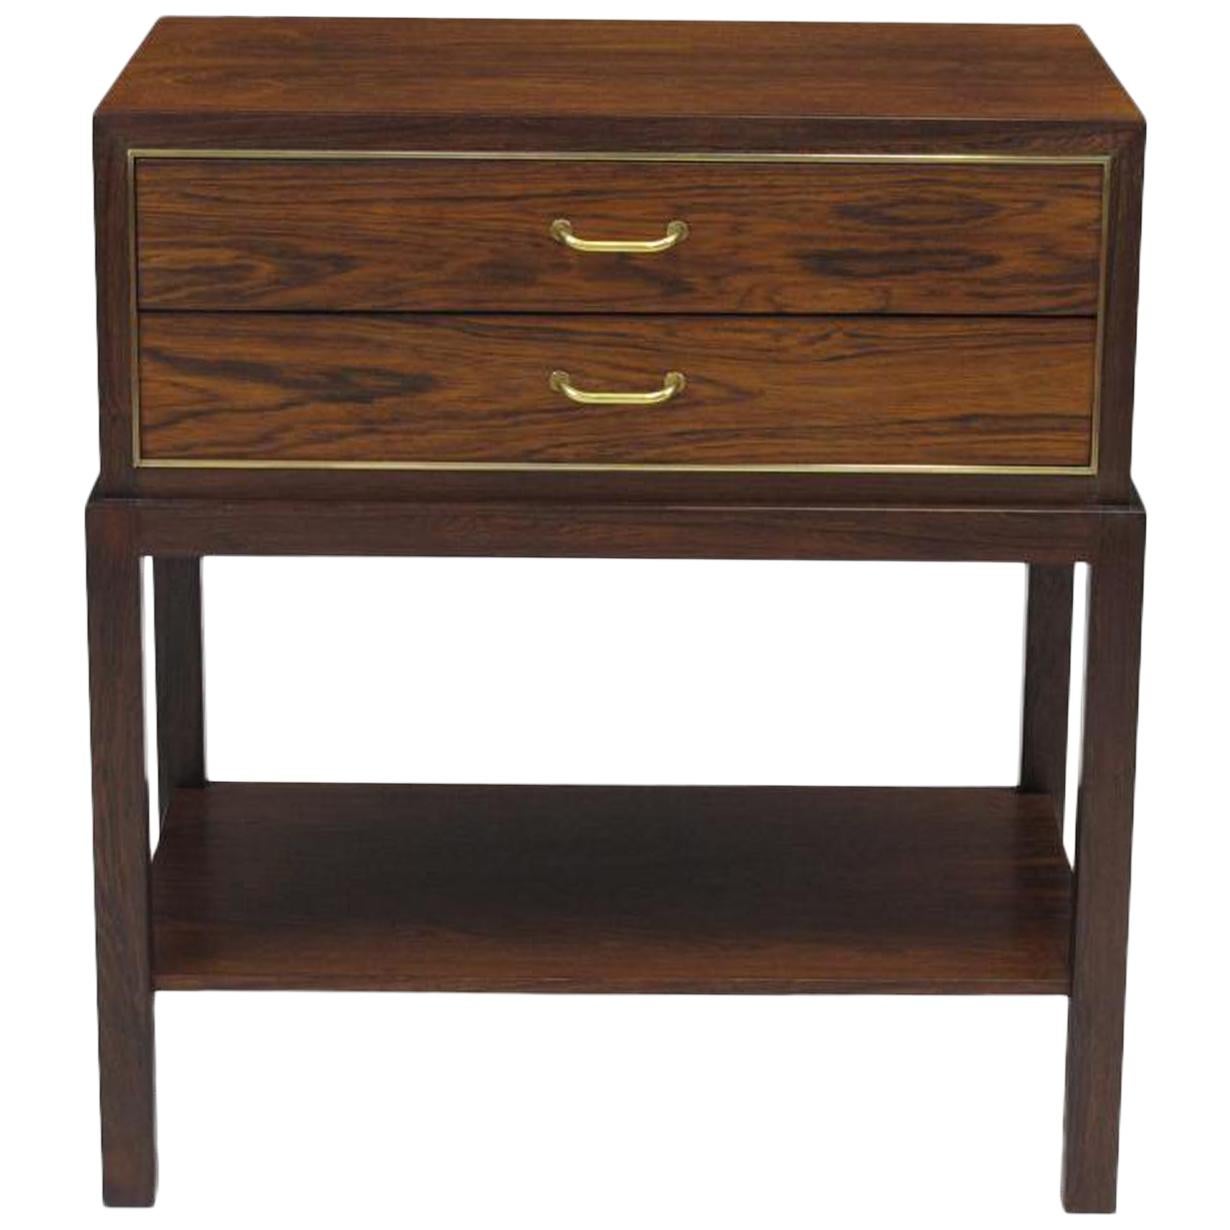 Brazilian rosewood nightstands designed by architect Ernst Kuhn (1890-1948), and handcrafted by Lysberg Hansen & Therp circa 1935 Denmark. Brazilian rosewood with mitered corners and brass inlay with two dovetailed drawers and elegant brass pulls